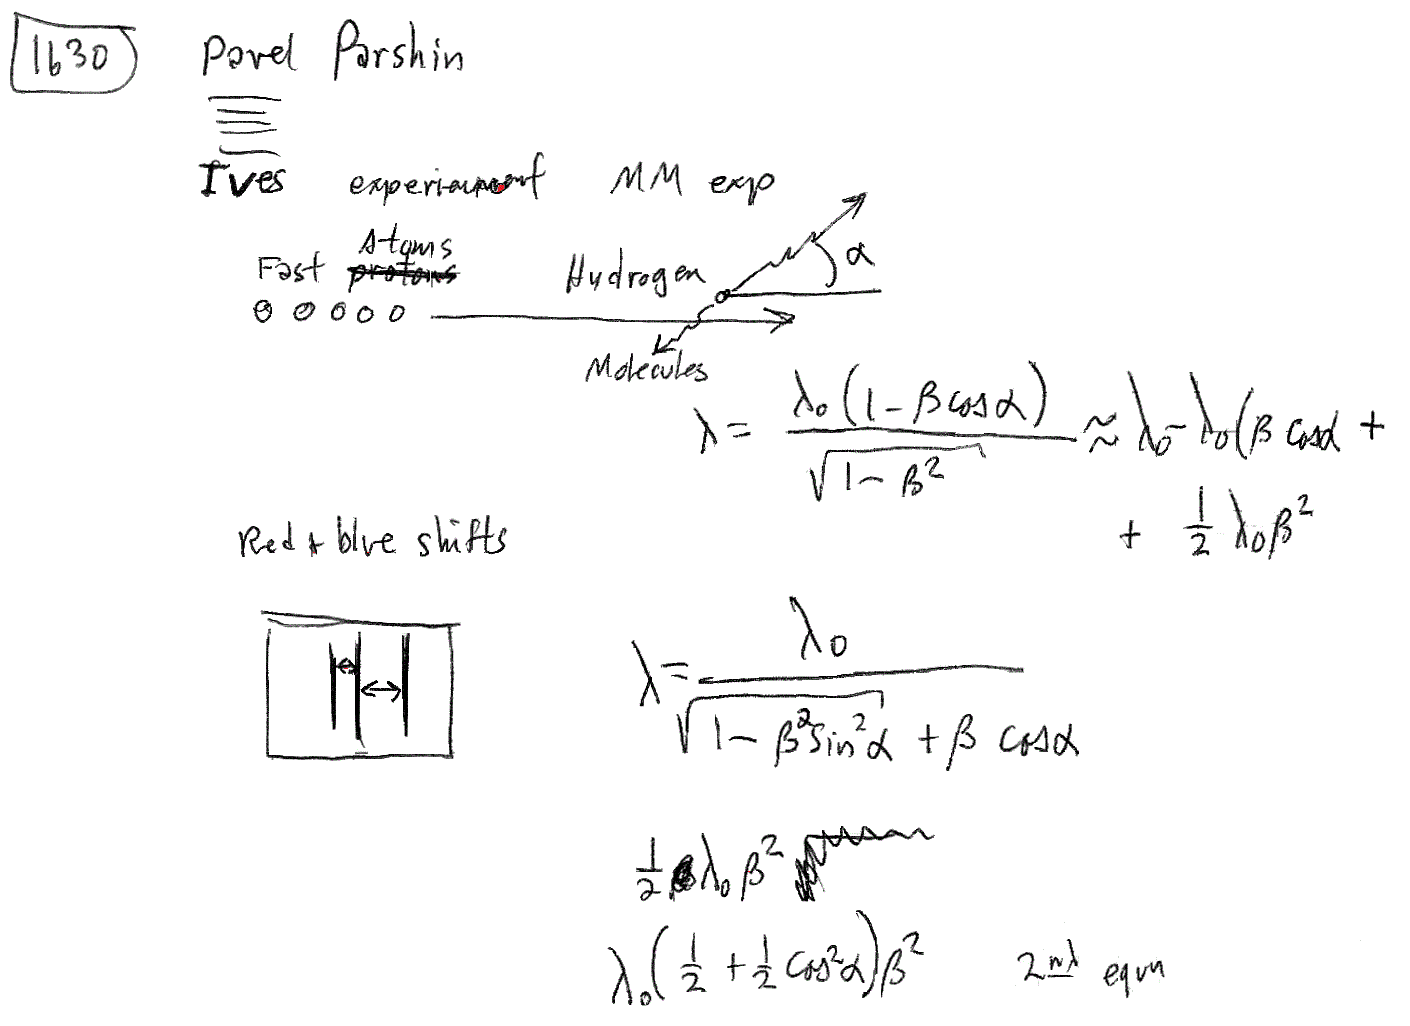 Parshin - Ives Experiment